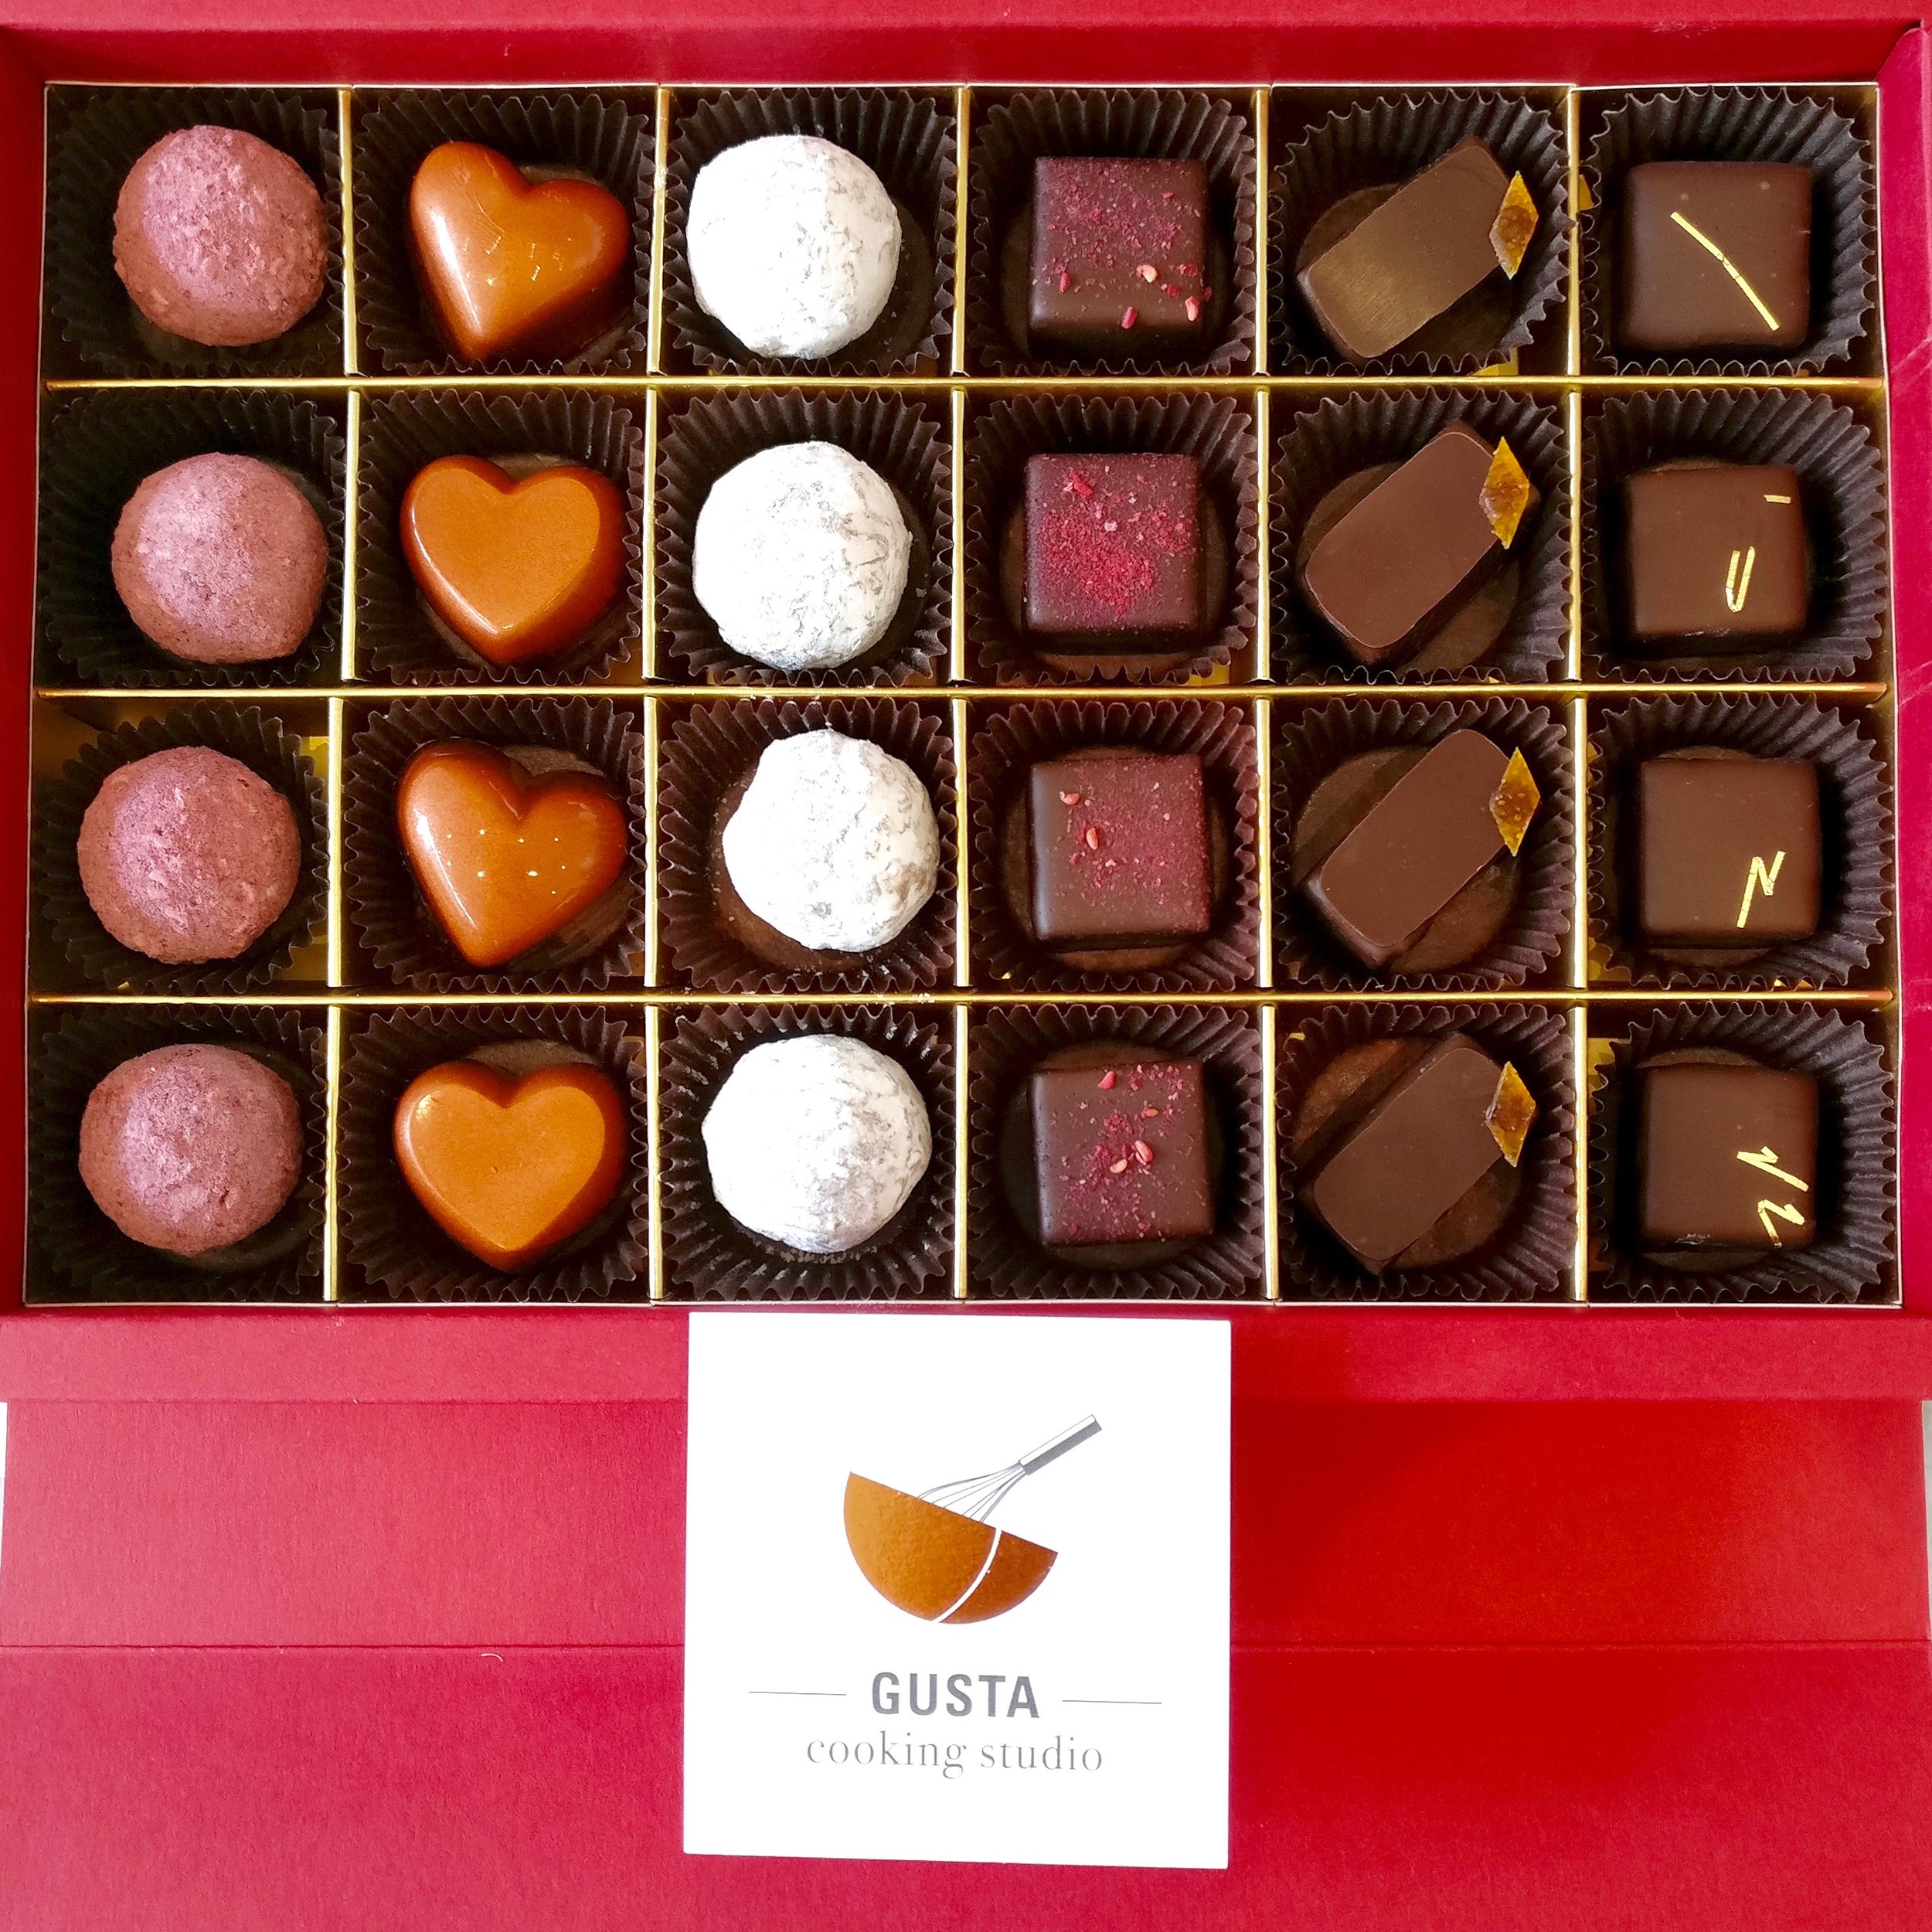 Valentine themed chocolate bonbons made by Gusta Cooking Studio